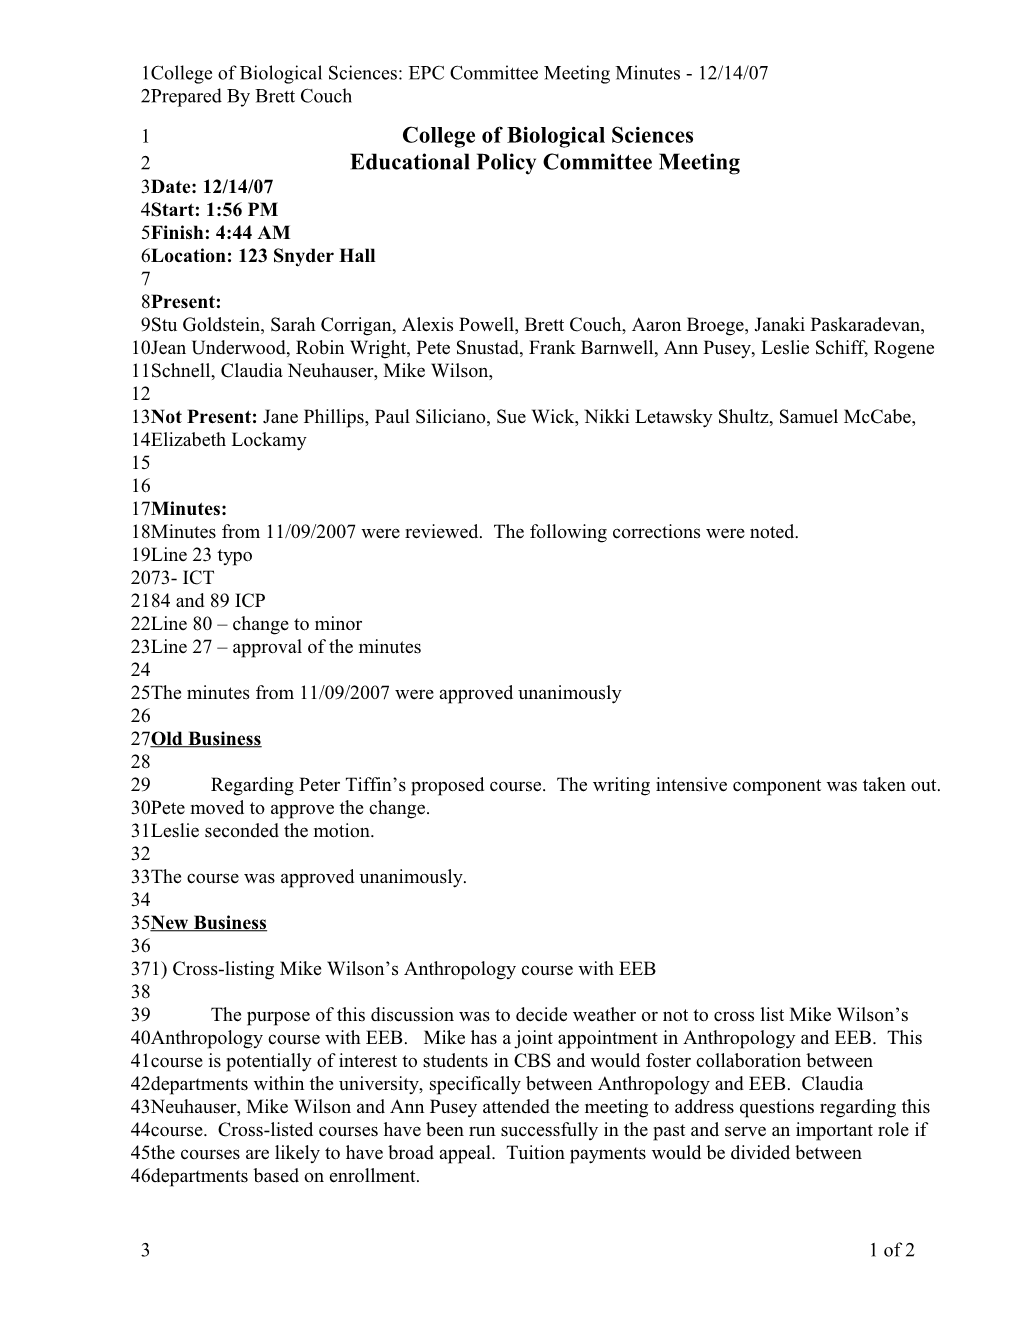 College of Biological Sciences: EPC Committee Meeting Minutes - 12/14/07